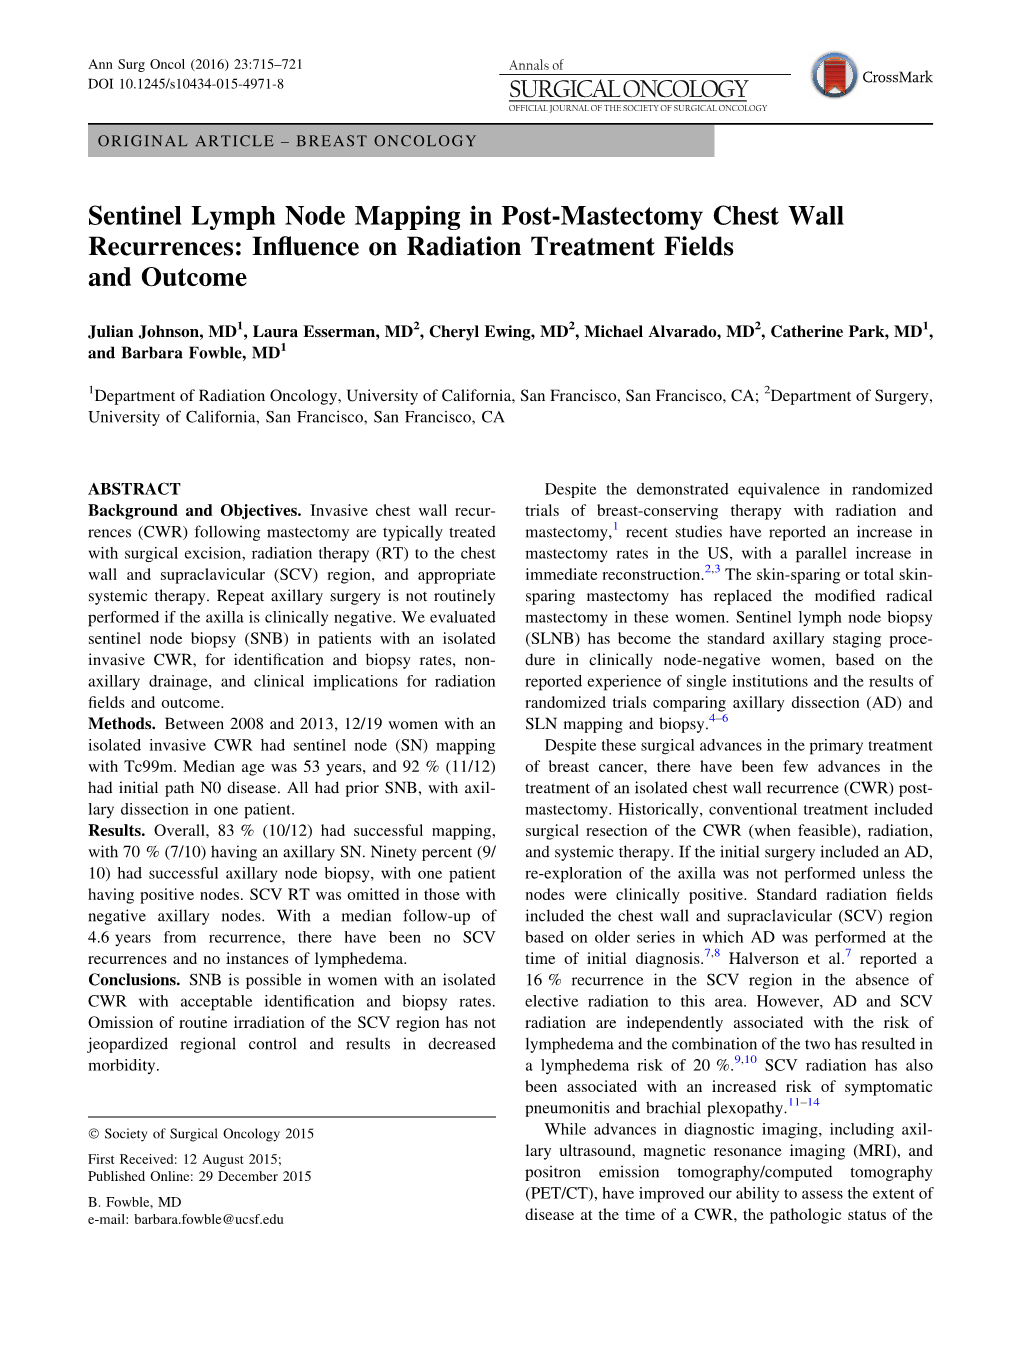 Sentinel Lymph Node Mapping in Post-Mastectomy Chest Wall Recurrences: Inﬂuence on Radiation Treatment Fields and Outcome